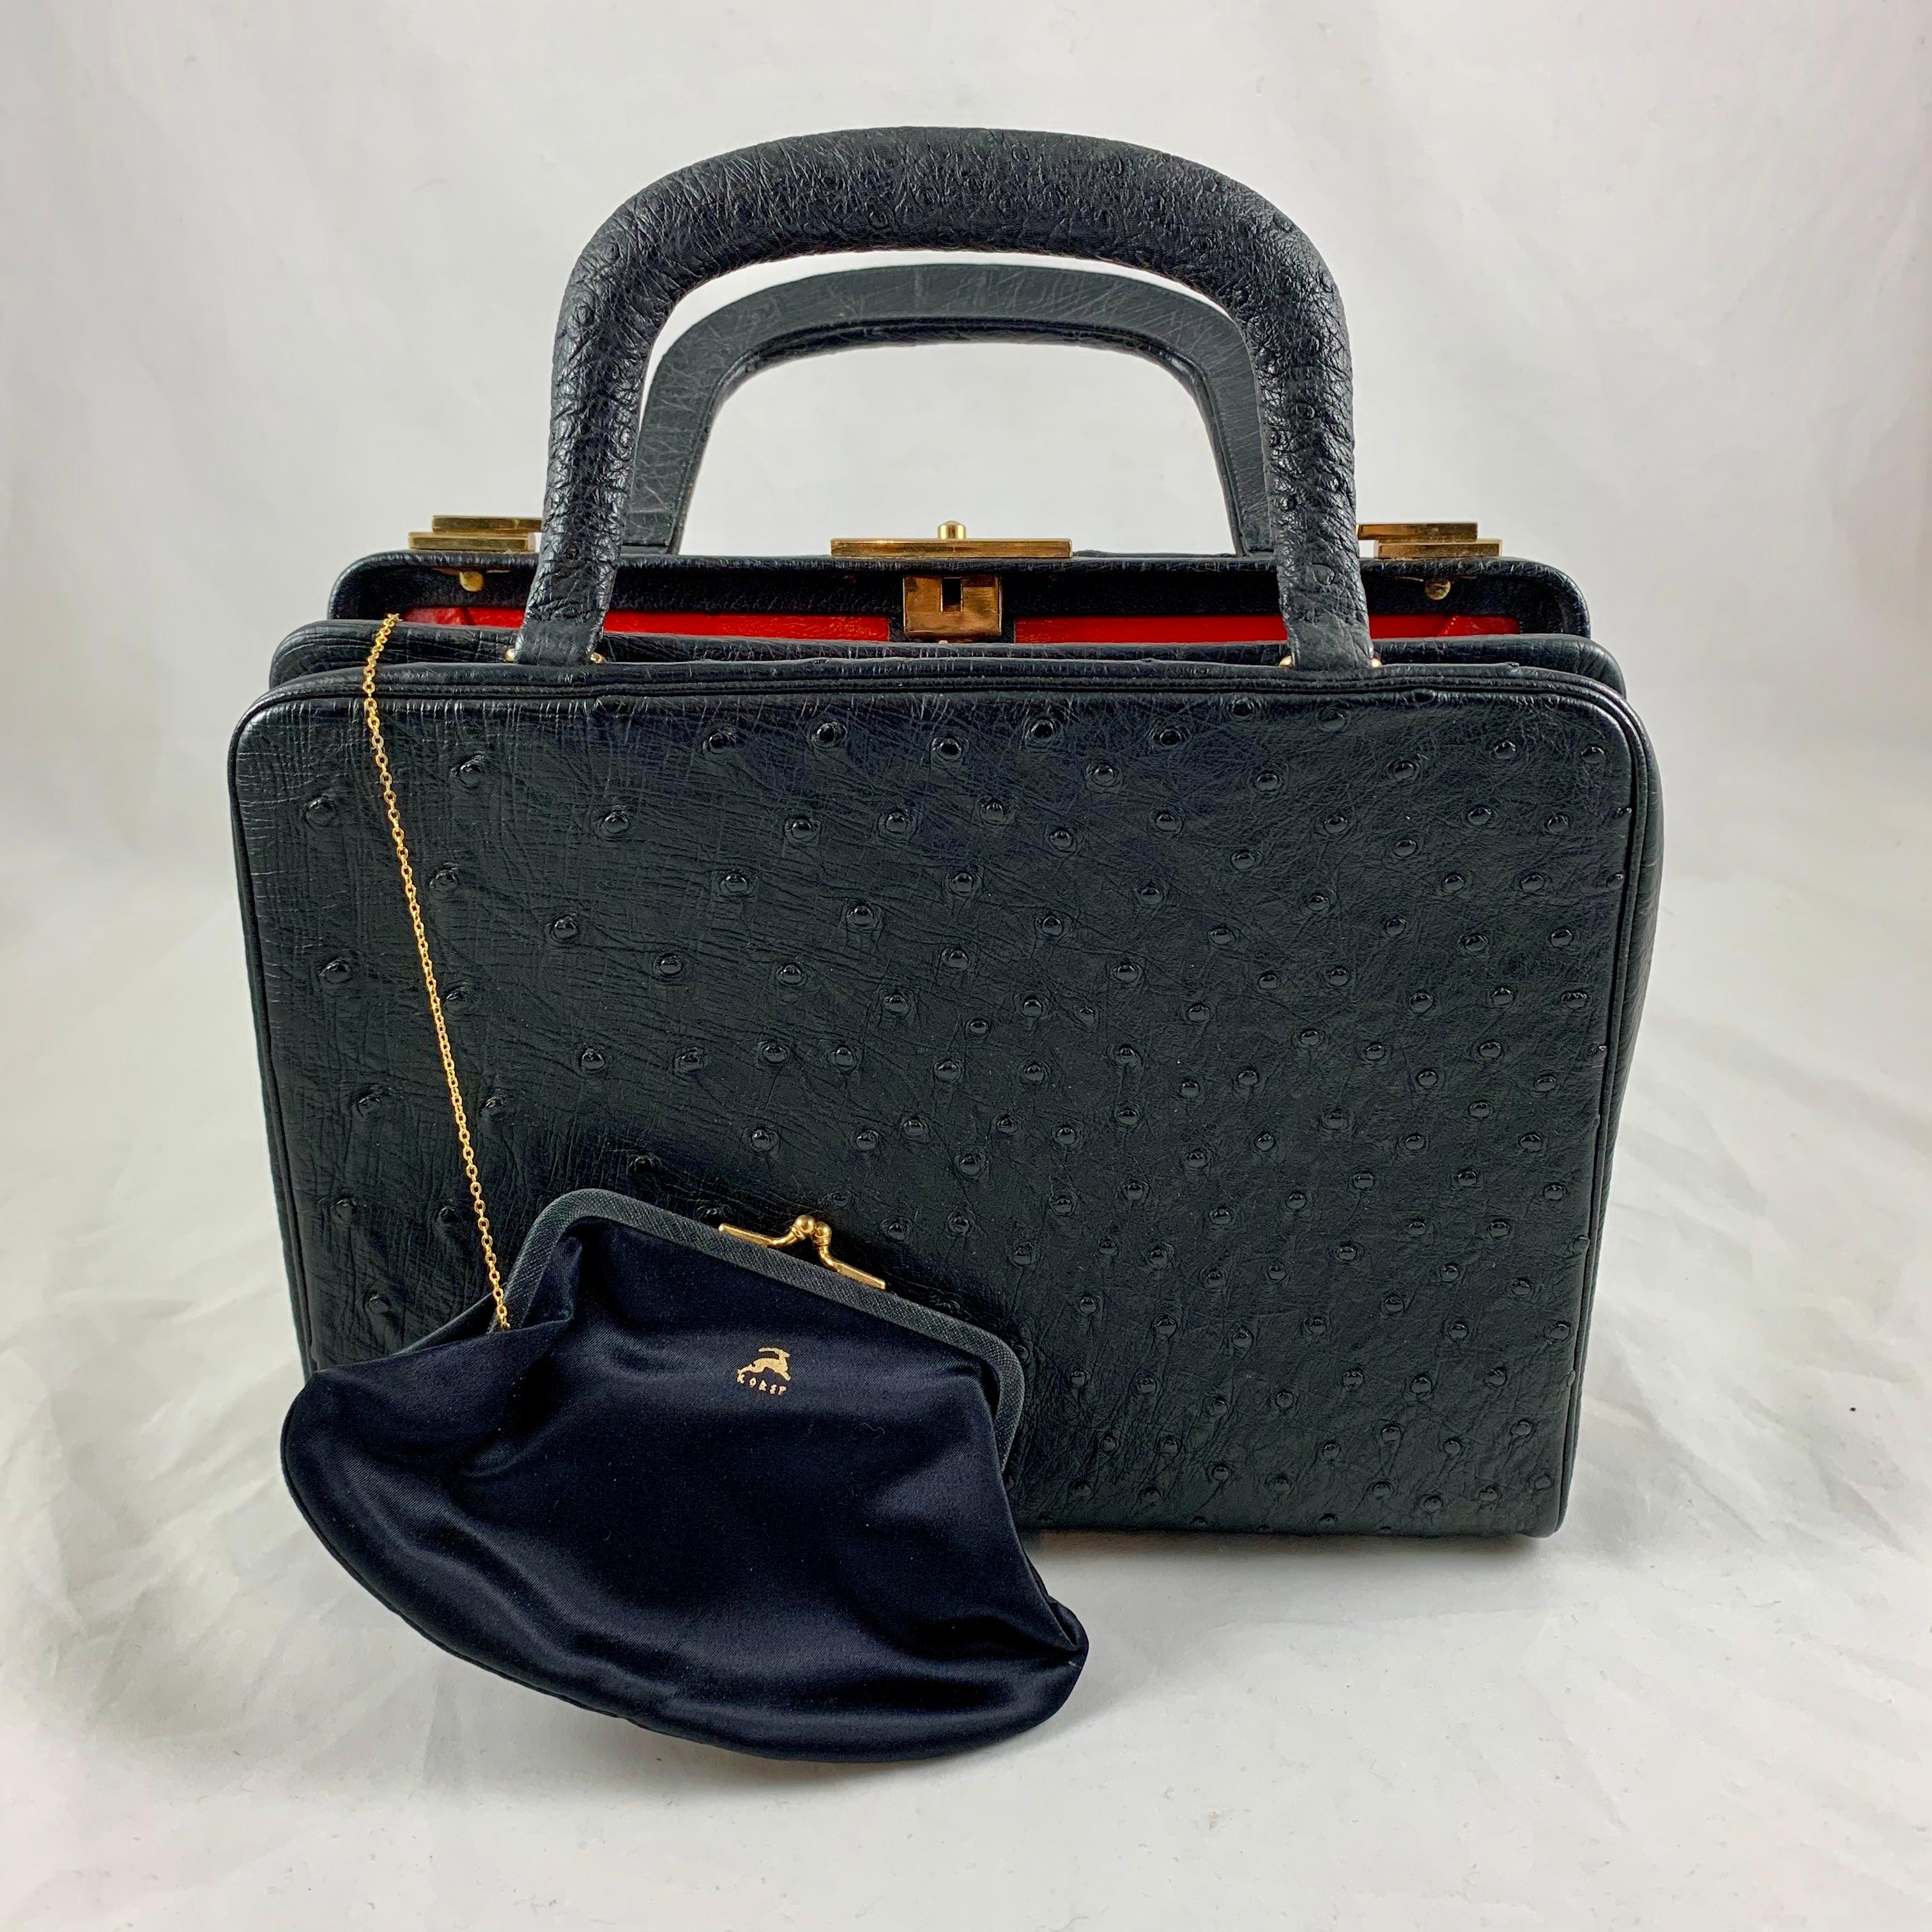 From the mid-late 1950s to early 1960s, a structured, black Ostrich handbag made by Koret, NYC.
Koret was established in 1929 by Richard Koret. By the 1940s the company was a leader in the handbag industry, combining great design with quality